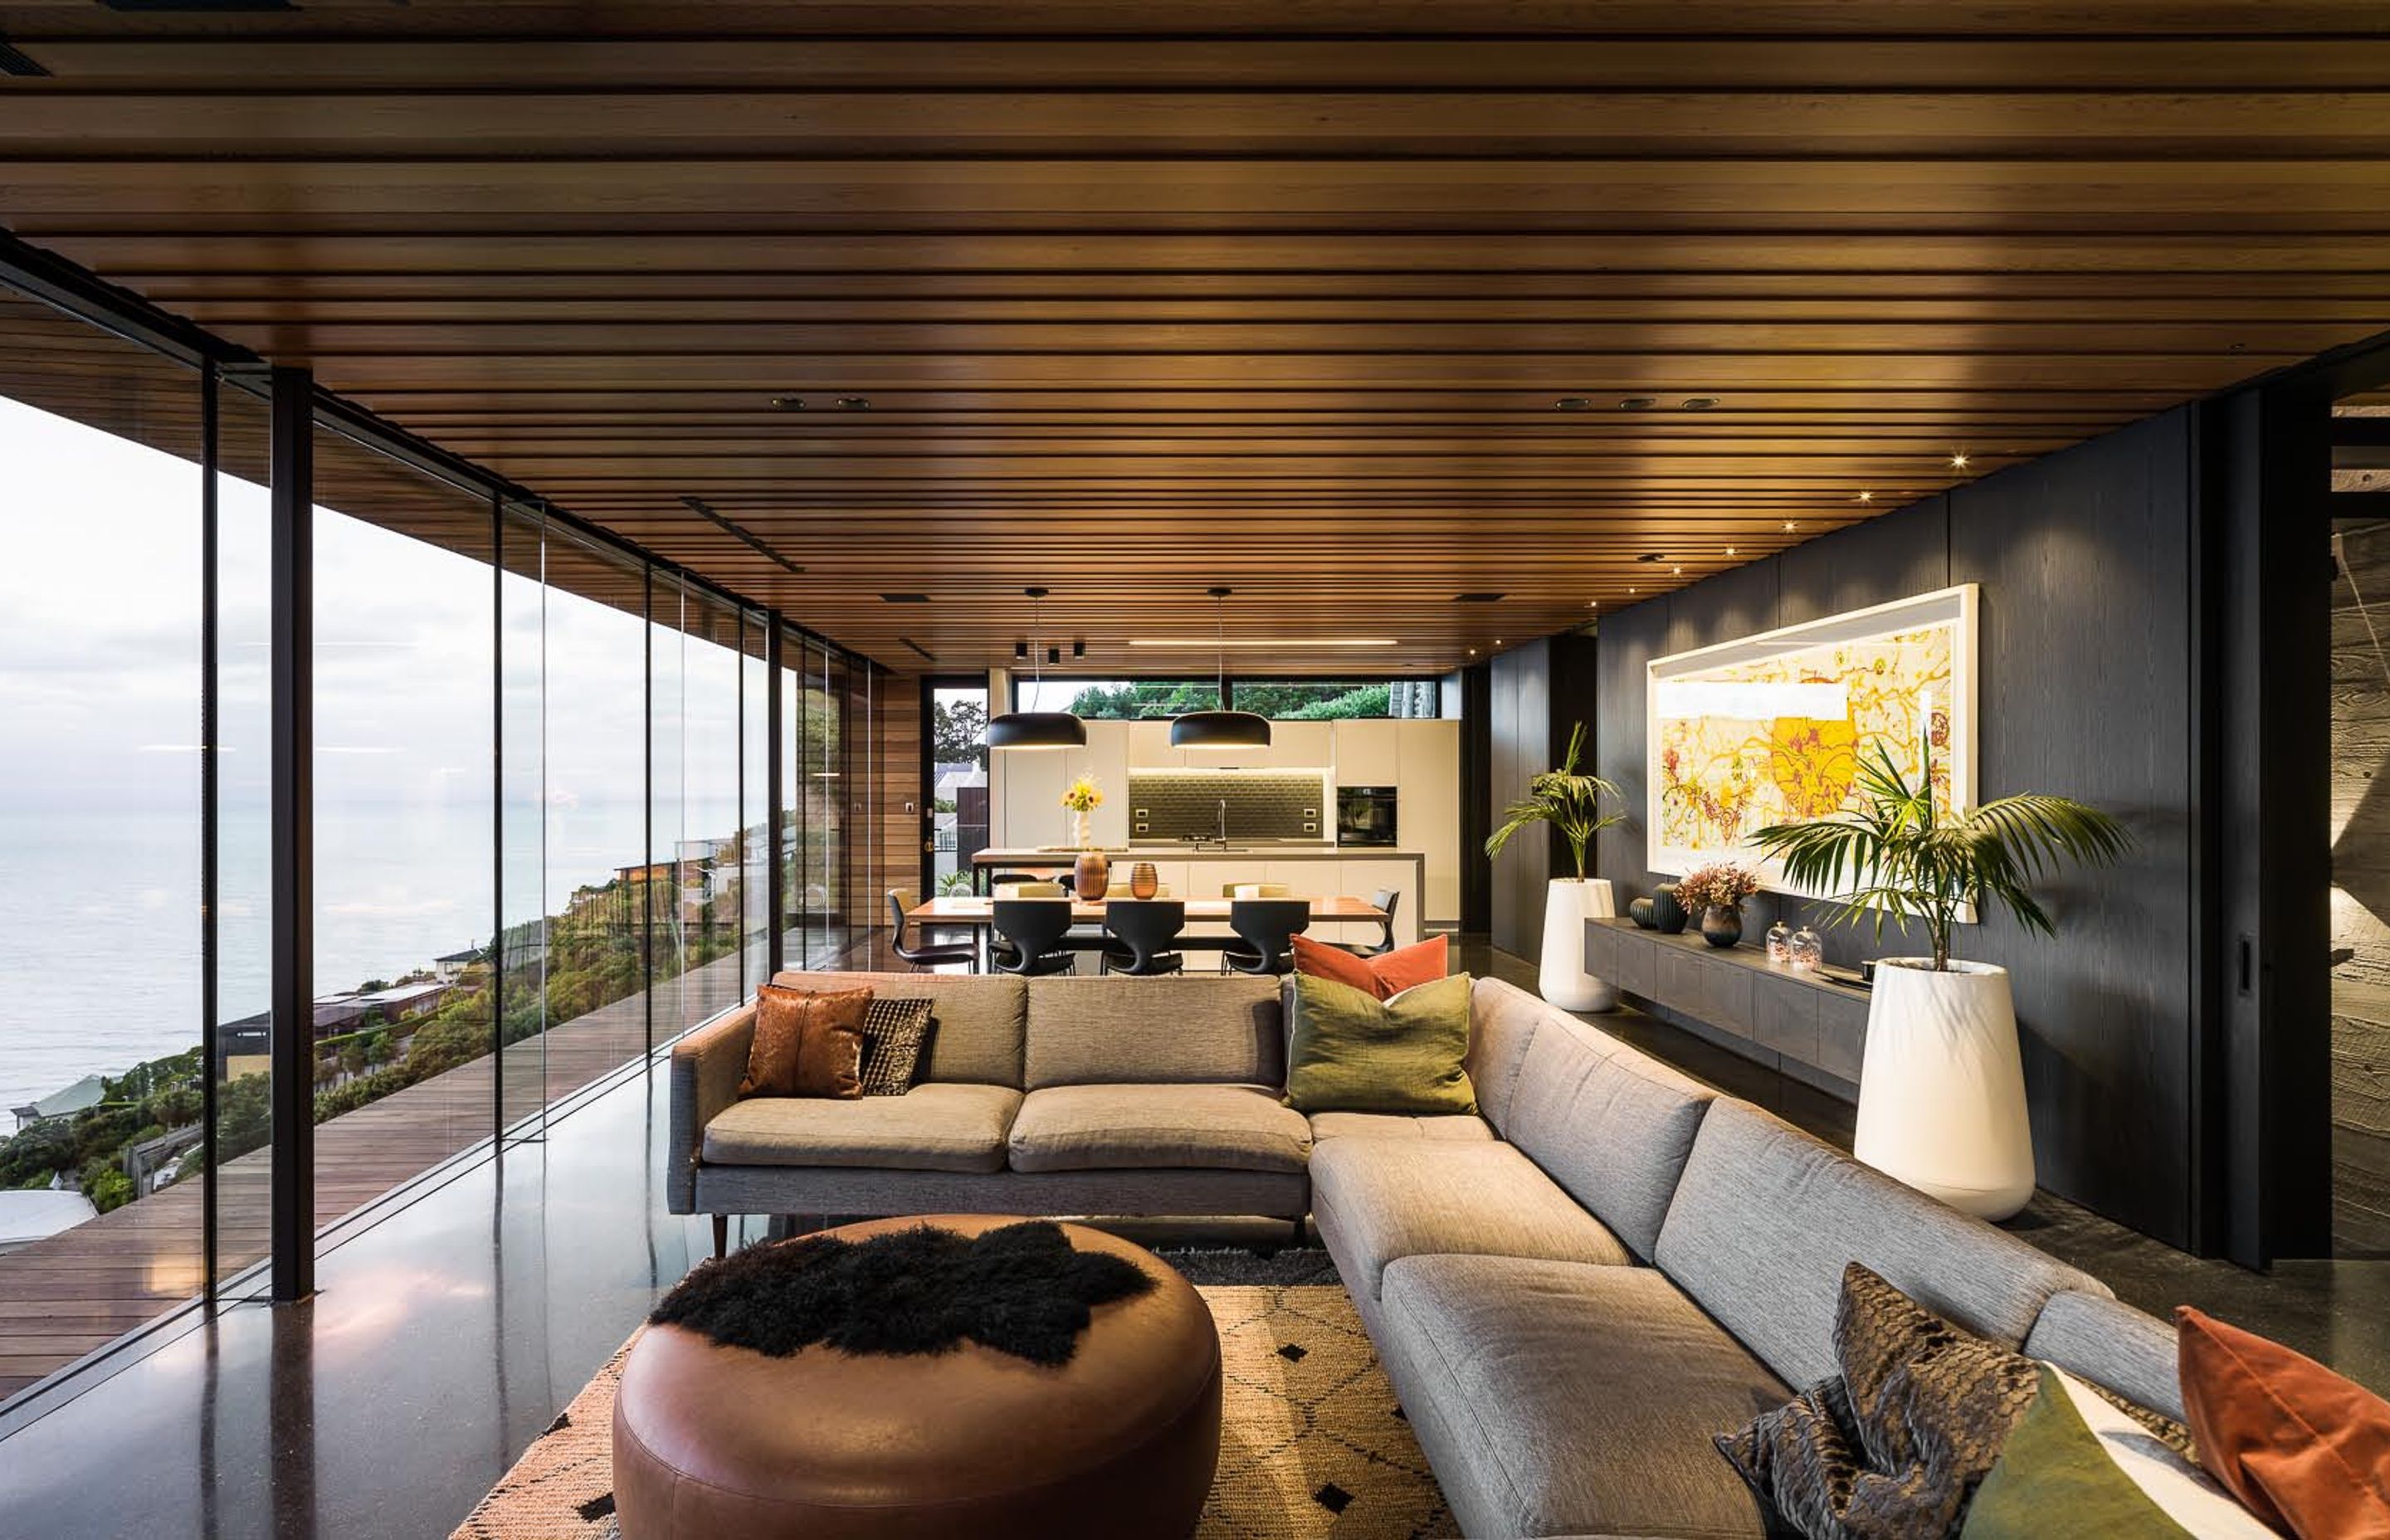 Contrasting with the concrete, the western red cedar makes the space feel warm.